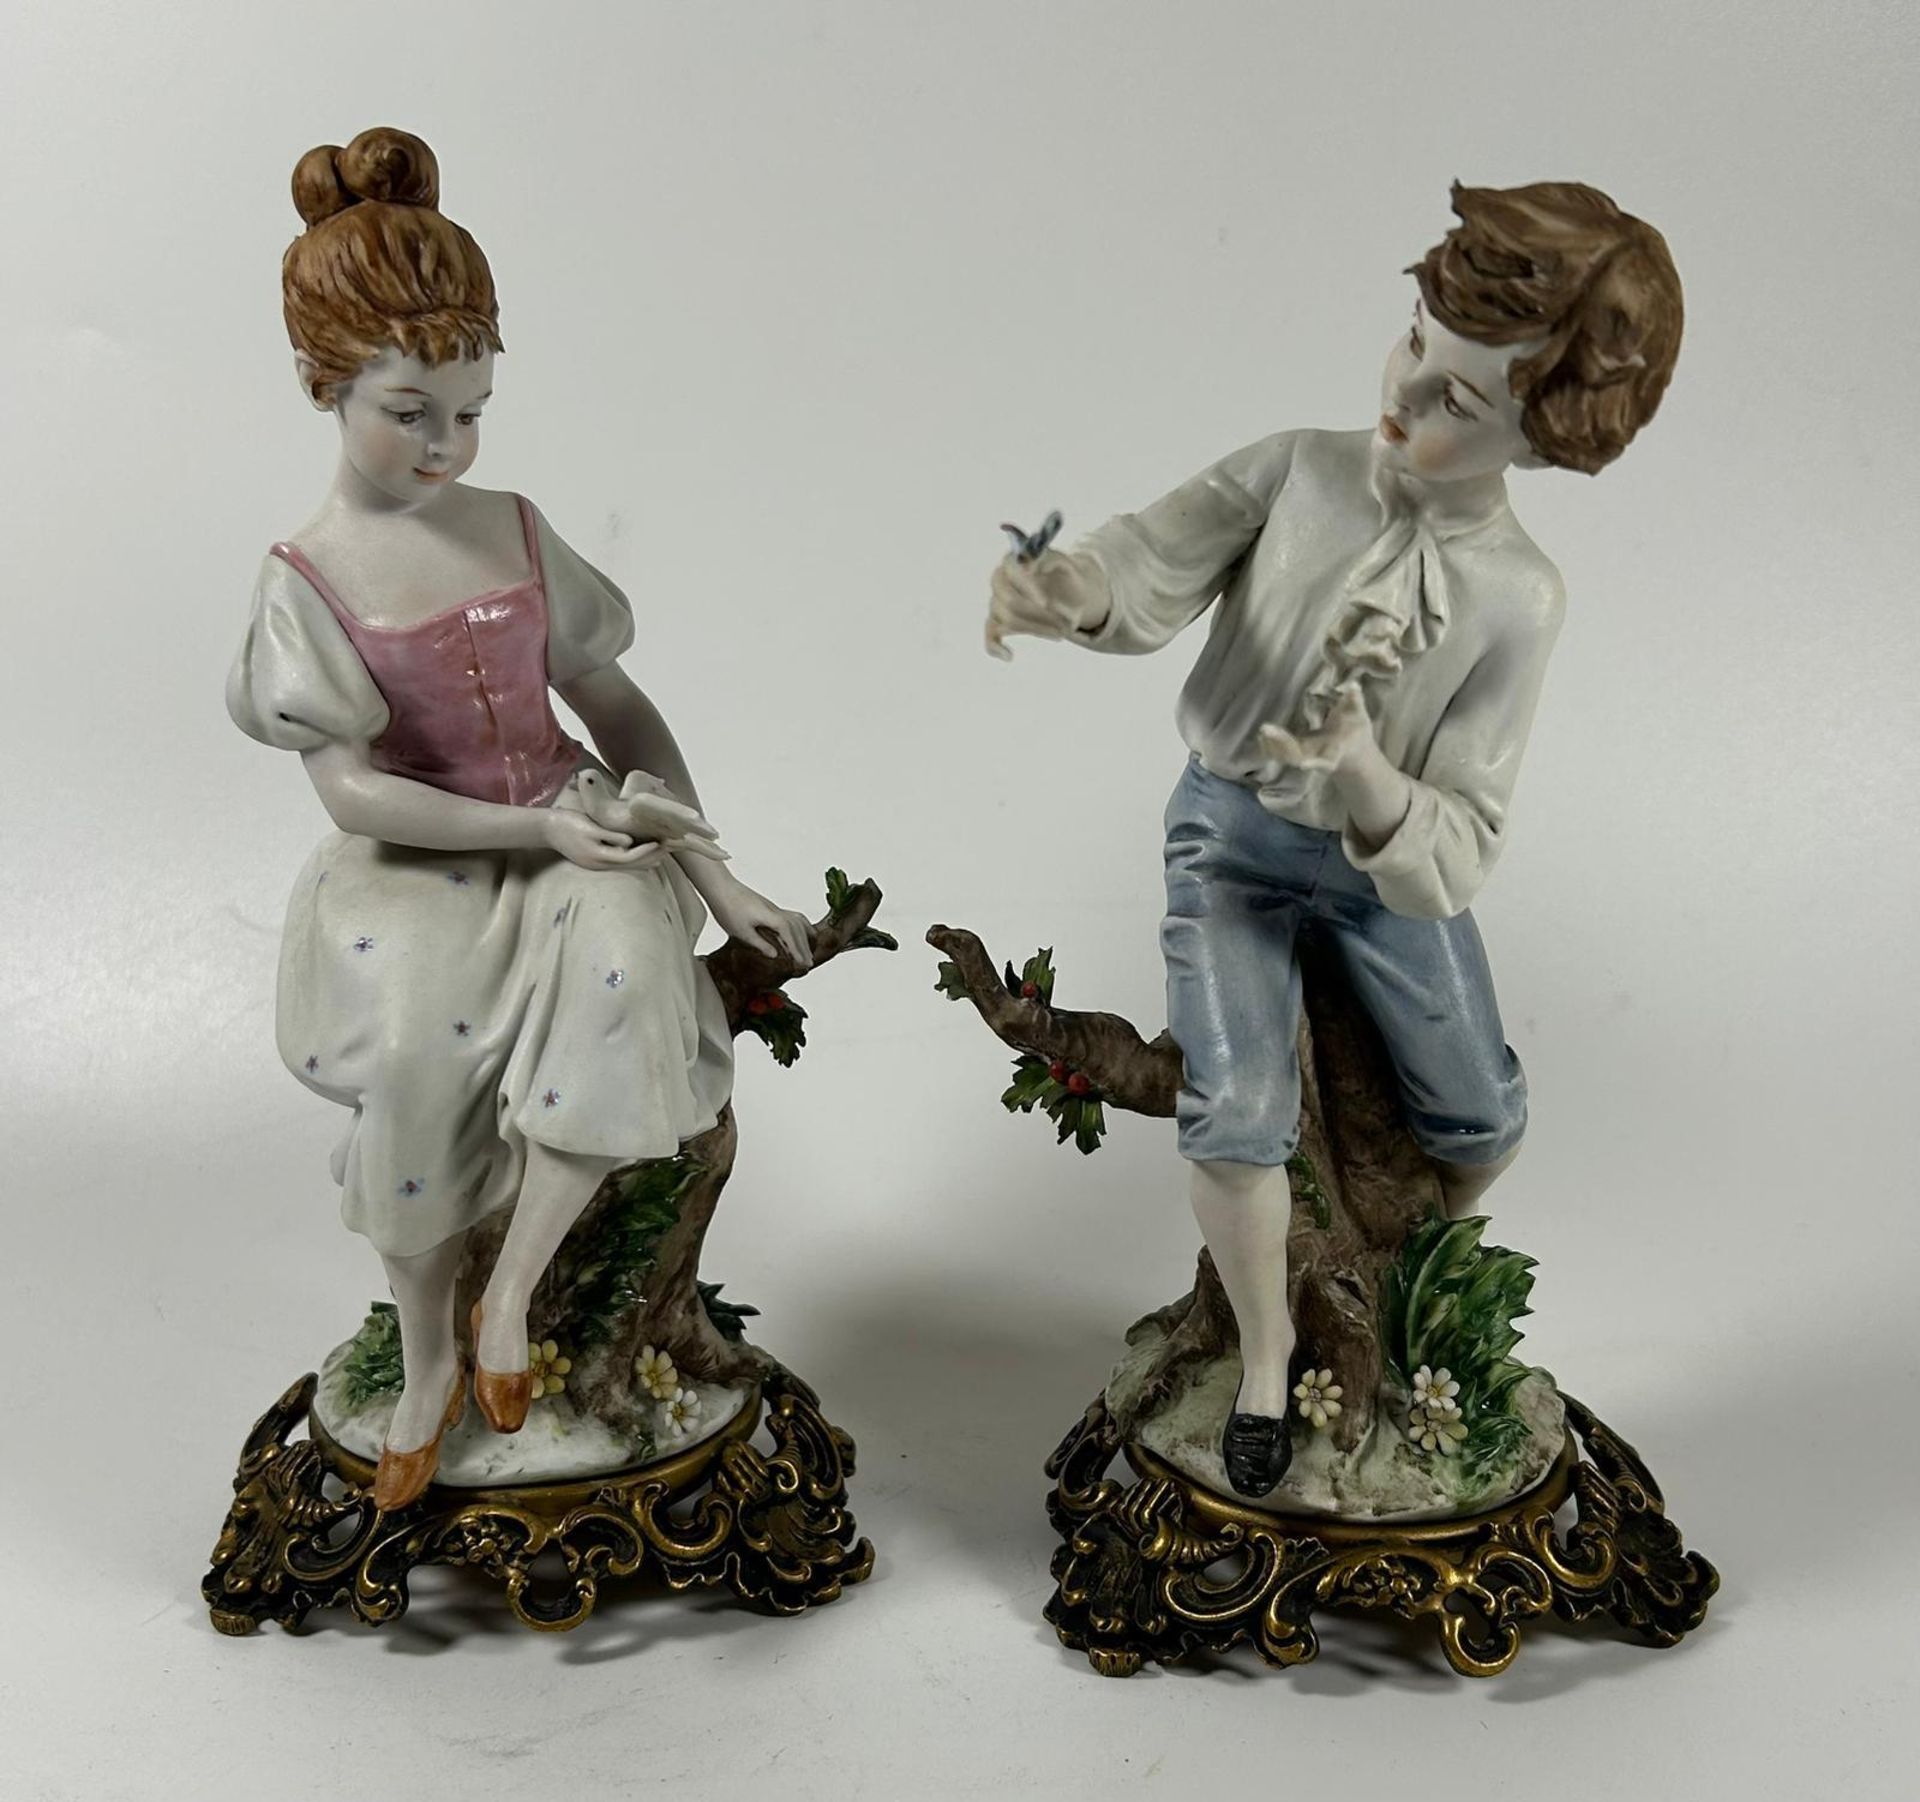 A PAIR OF CONTINENTAL PORCELAIN FIGURES OF A BOY AND GIRL ON GILT METAL BASES